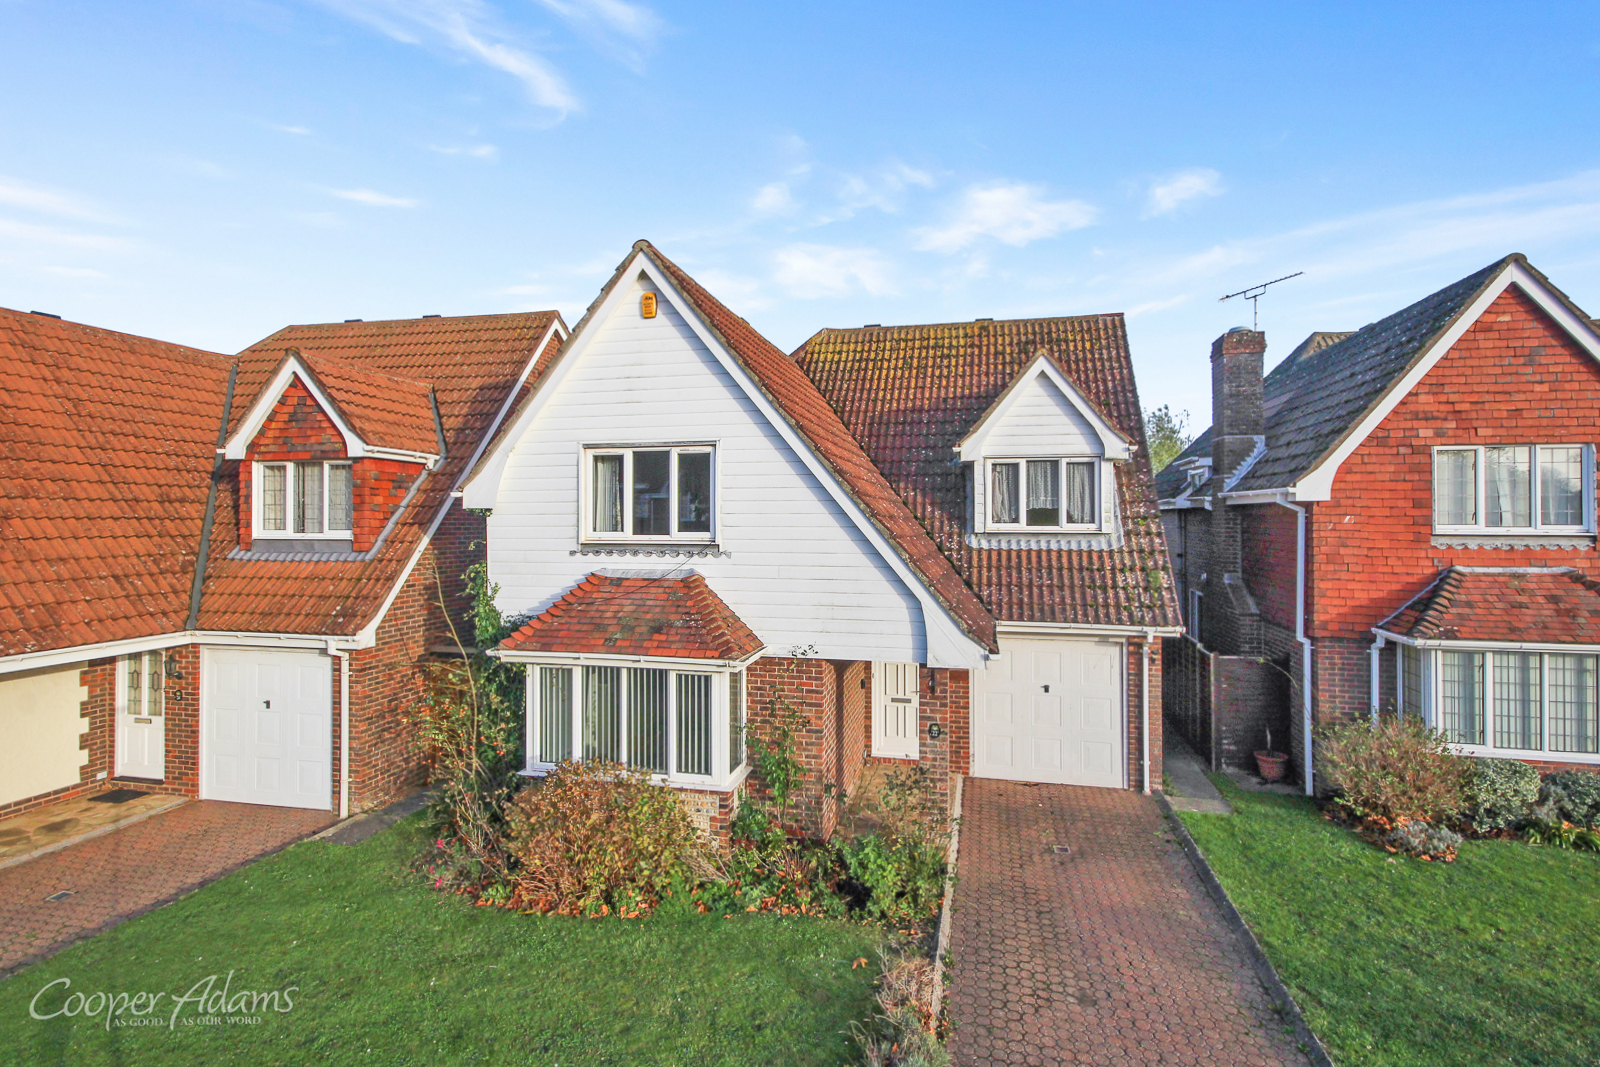 4 bed house for sale in Cowdray Drive, Rustington - Property Image 1